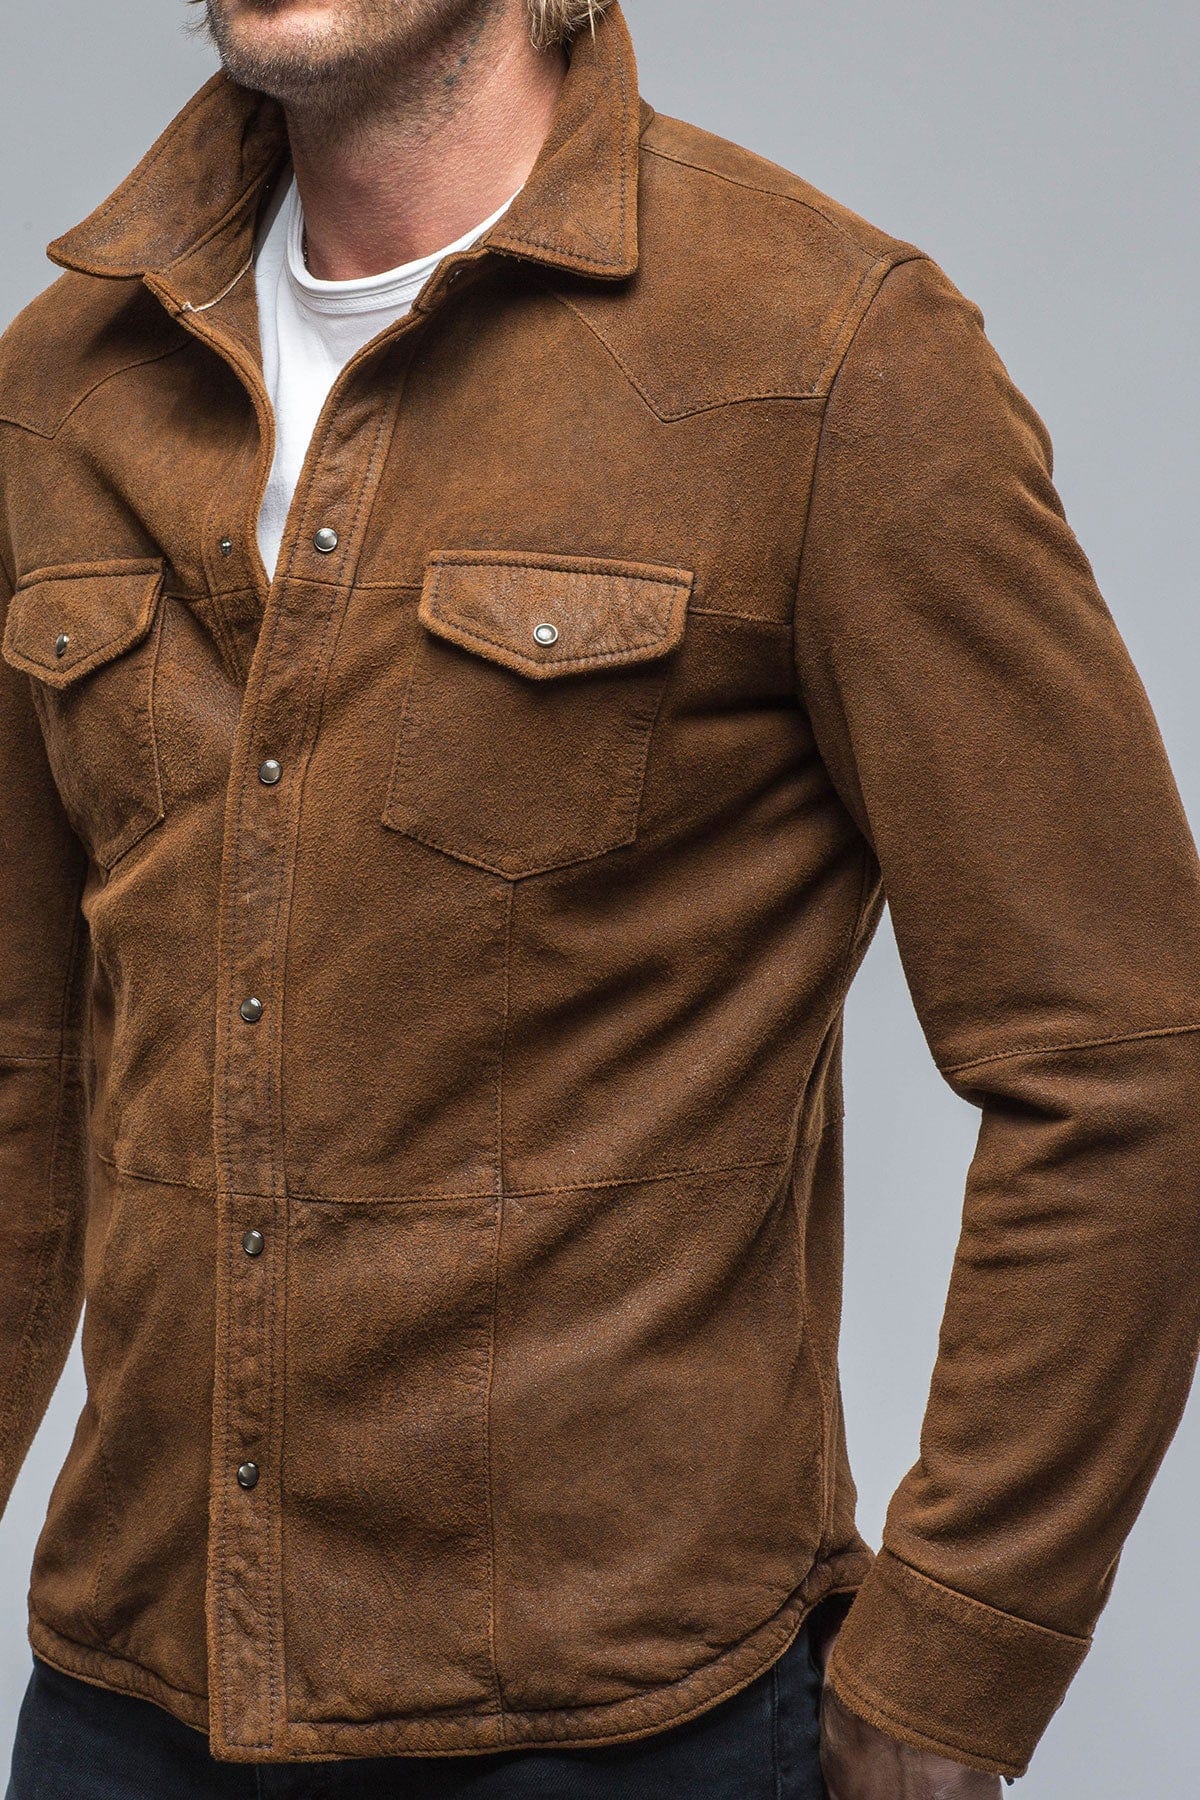 Men's Leather & Suede Jackets | Axel's – Page 2 – AXEL'S